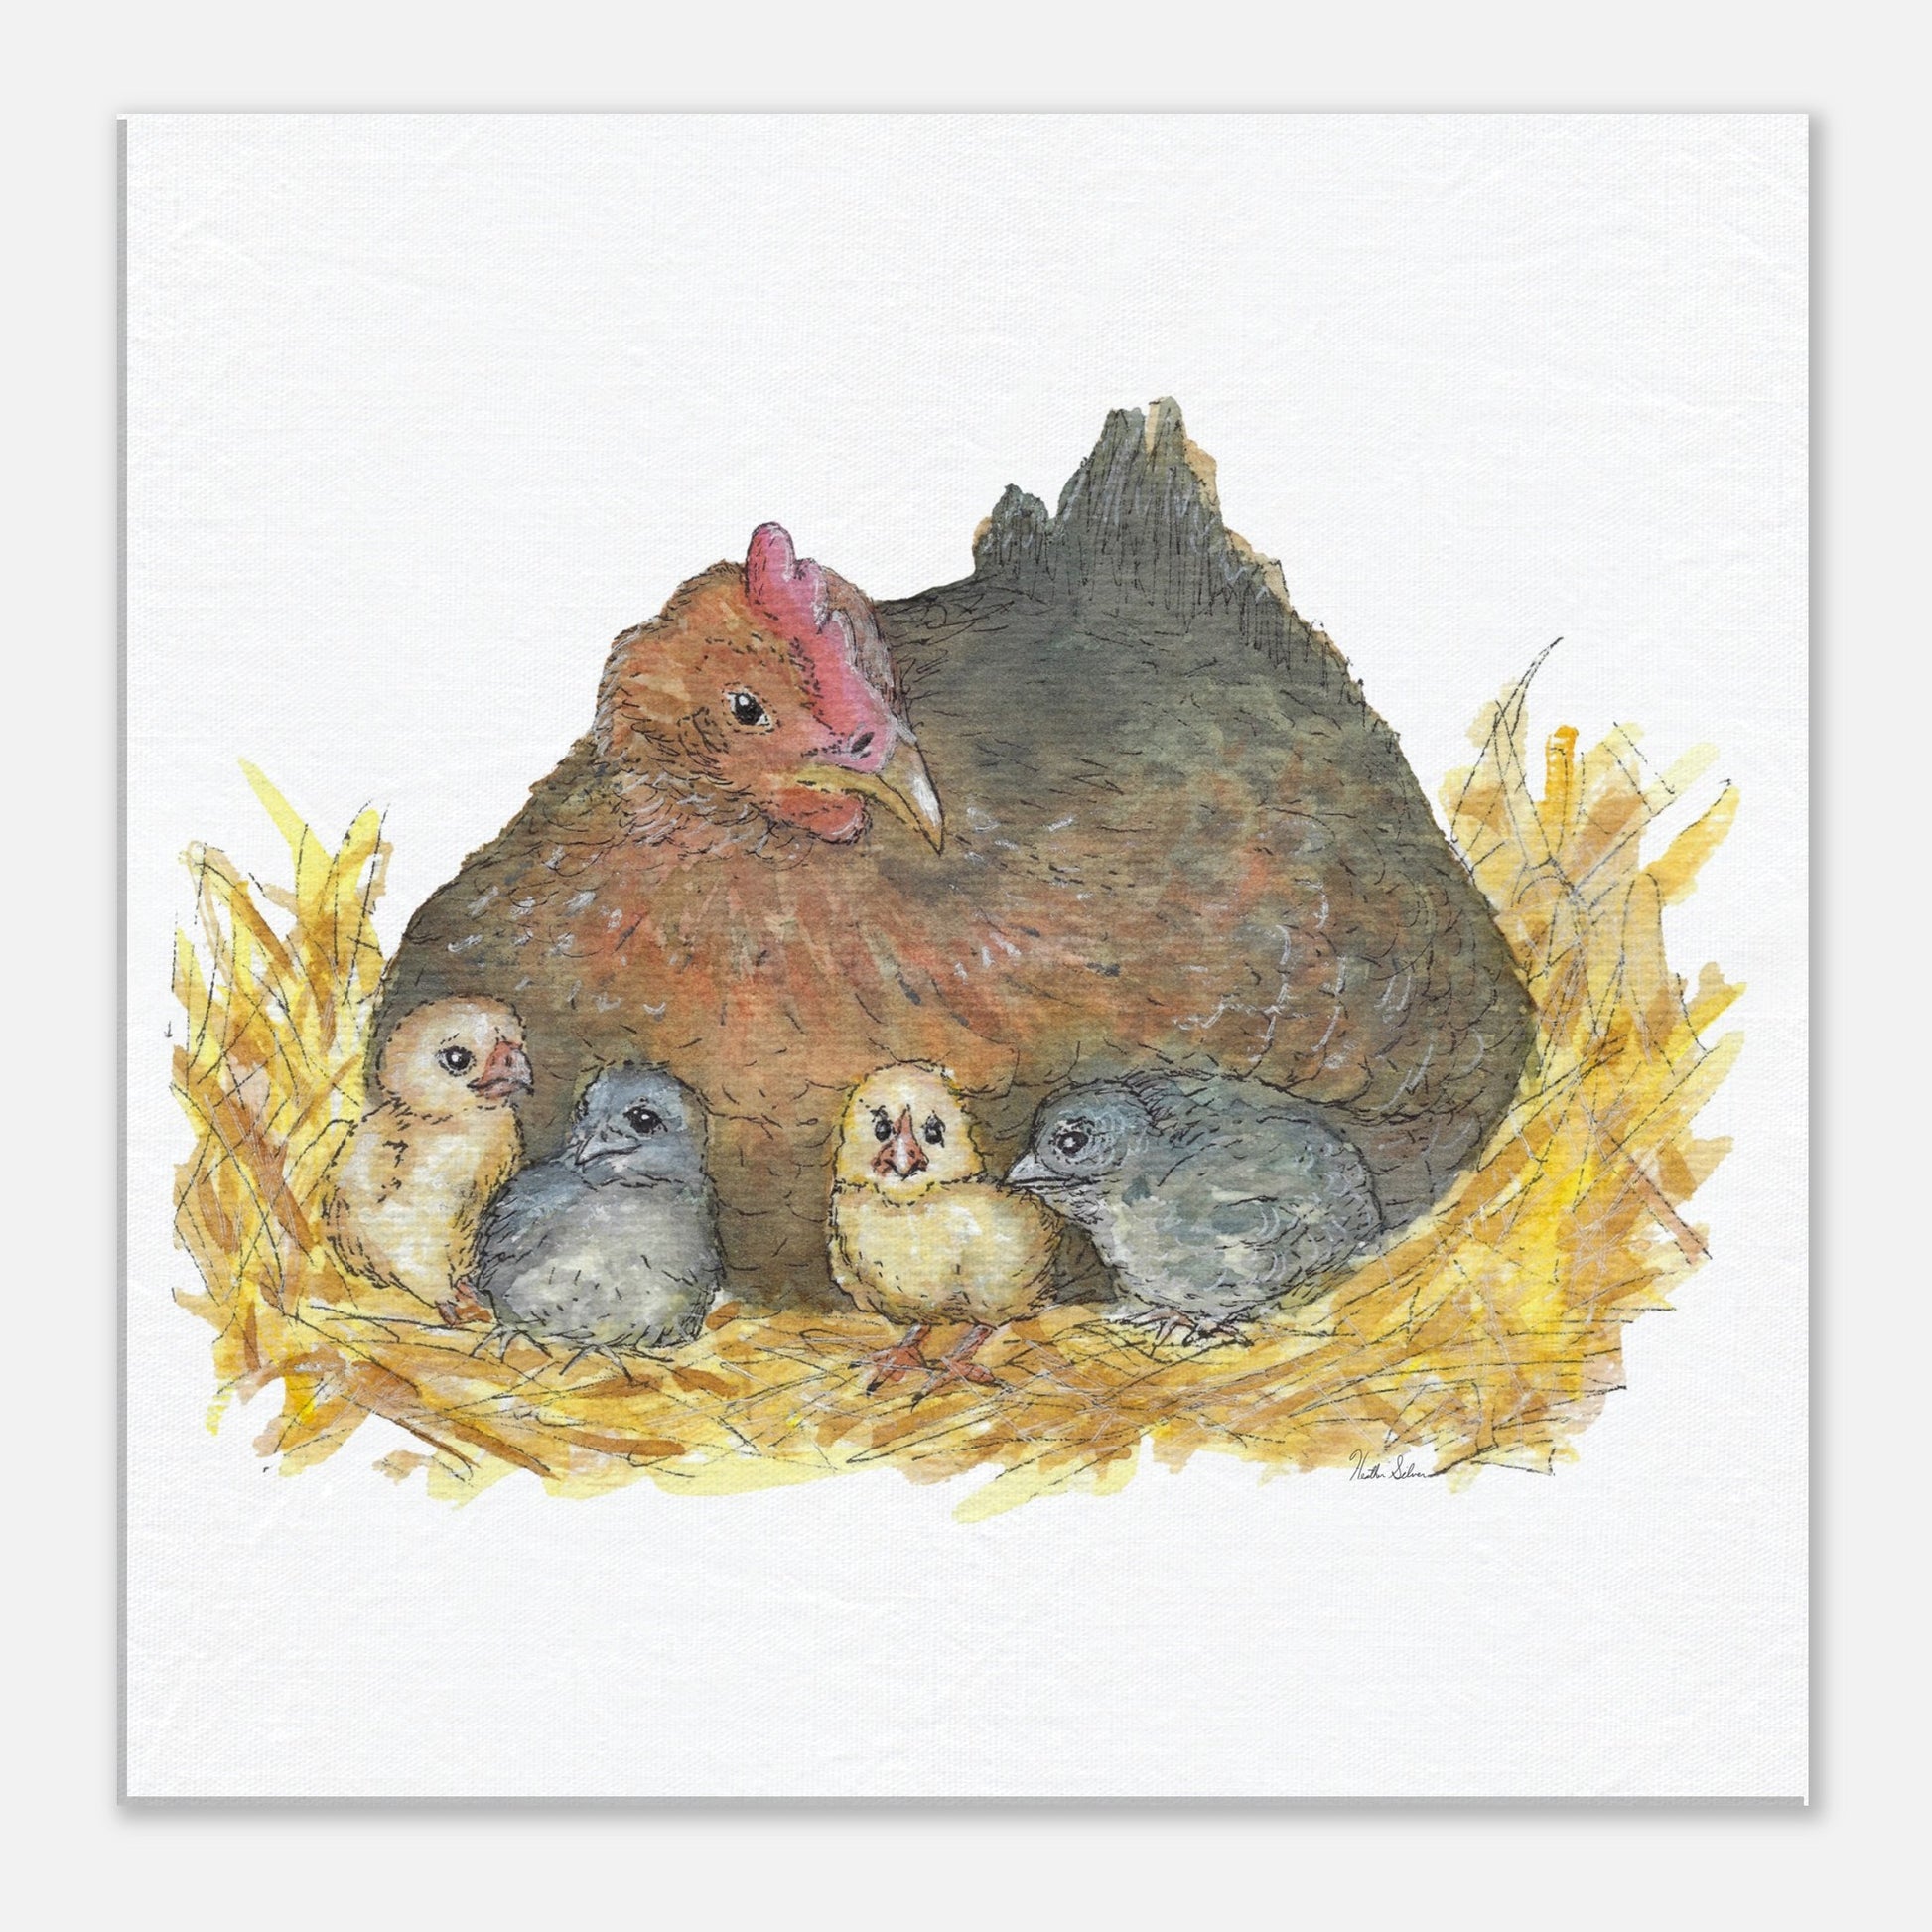 16 by 16 inch slim canvas Mother Hen print. Features a watercolor mother hen and her four chicks in a nest.